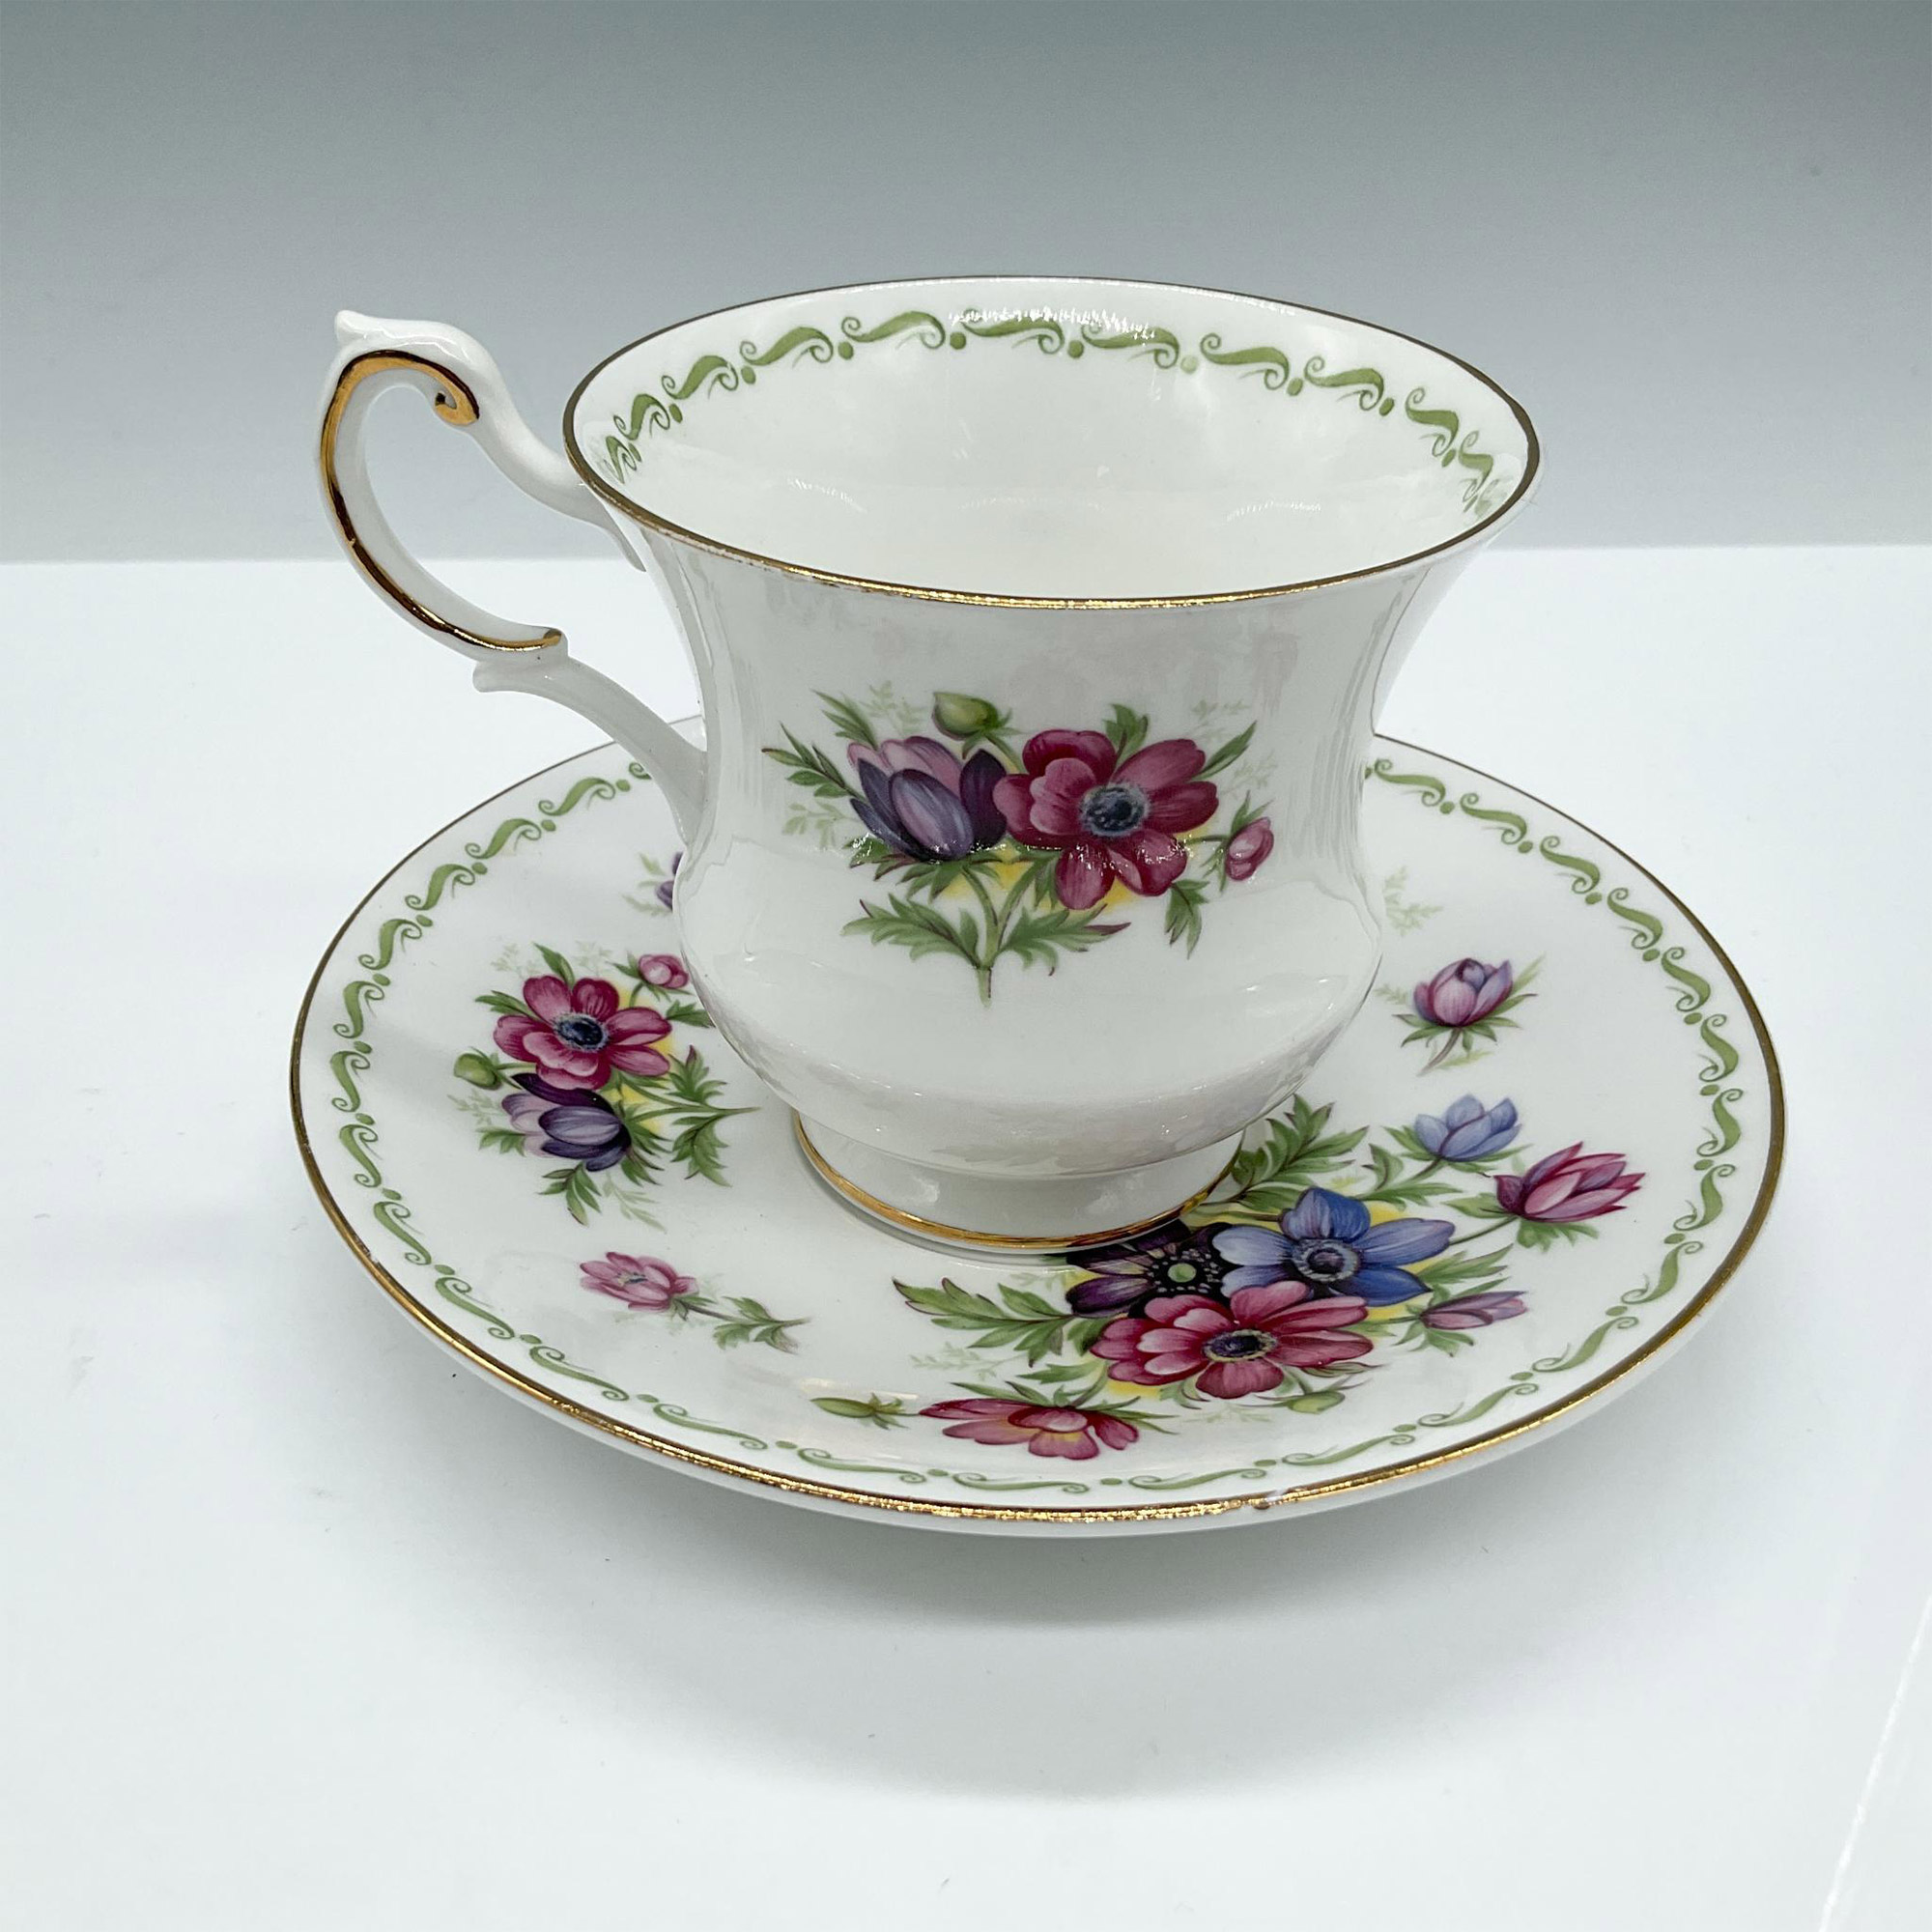 Royal Dover Bone China Tea Cup and Saucer Set, Floral - Image 2 of 4